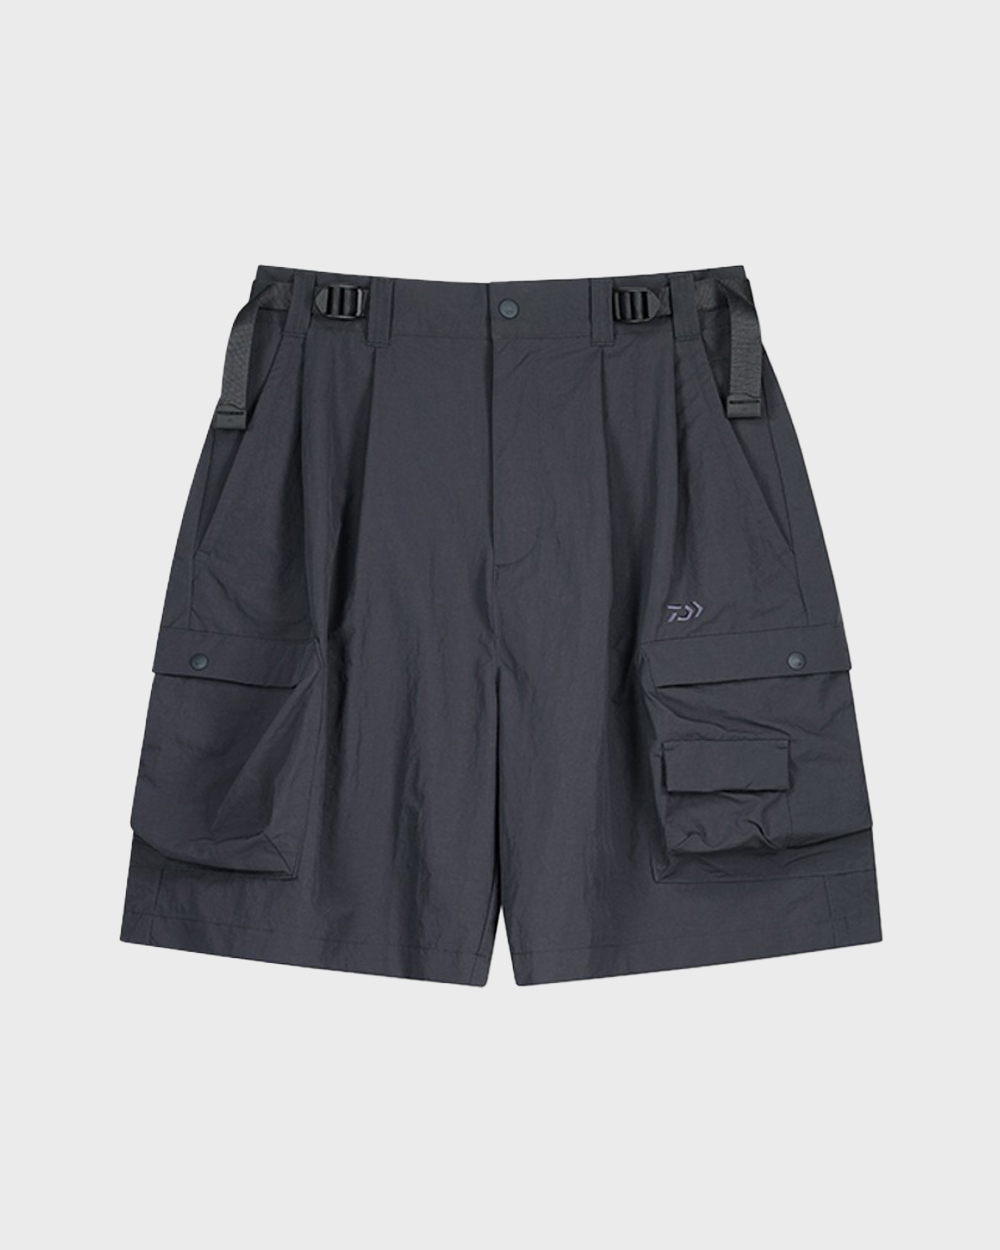 Two Tuck Shorts (Charcoal)